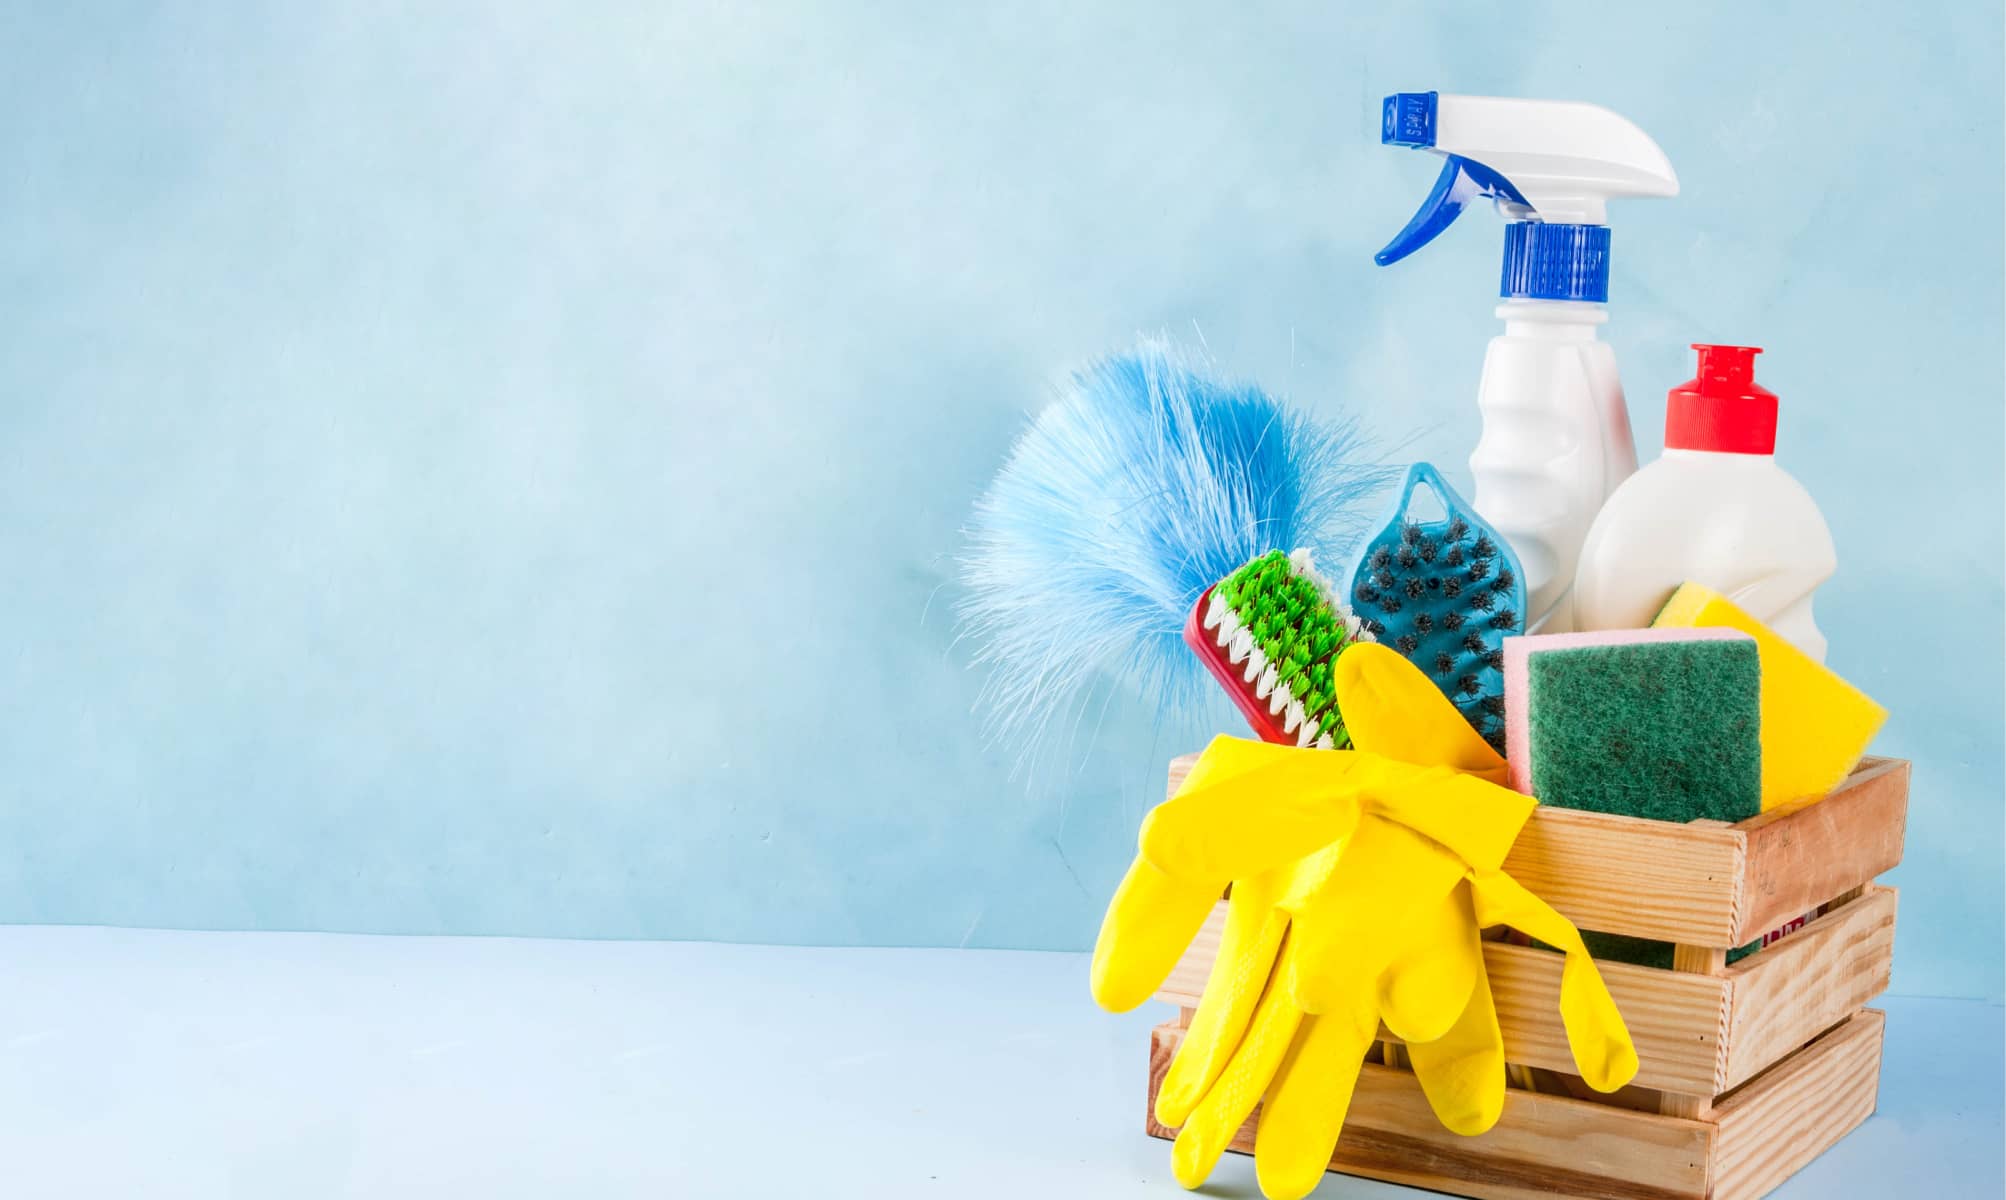 spring-cleaning-concept-with-supplies-house-cleaning-products-pile-household-chore-concept-light-blue-background-copy-space 1 (1)